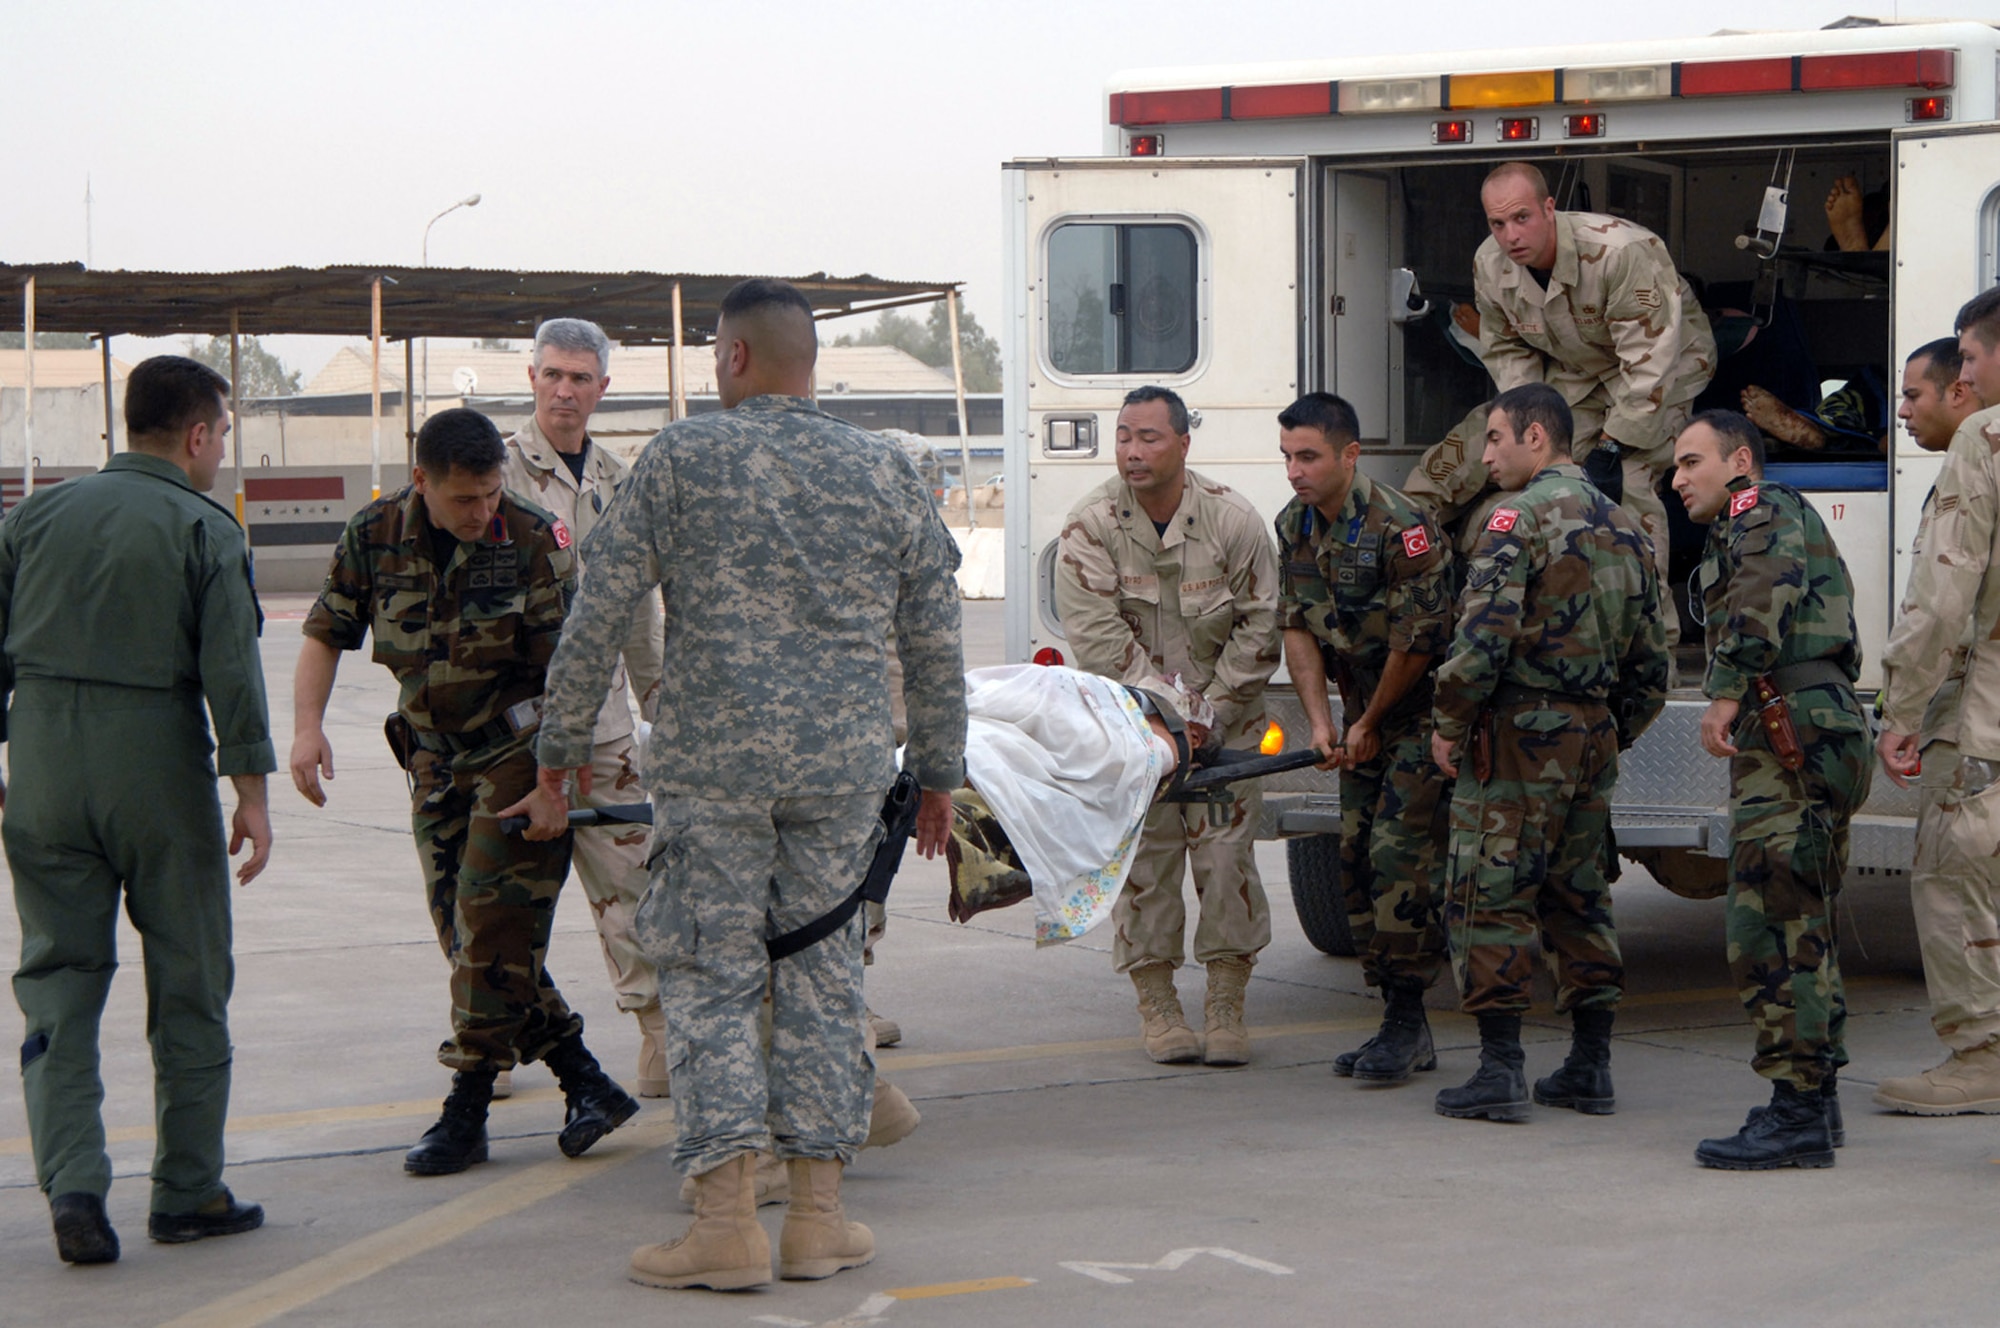 Airmen from the 506th Air Expeditionary Group, an Army Soldier and Turkish army and air force members help transport a victim of an Iraqi vehicle borne improvised explosive device to a Turkish medical aircraft July 8 at Kirkuk Air Base, Iraq. The victim was hurt in the July 7 market bombing in Tuz Khurmato, Iraq. Airmen from the 506 AEG worked with Iraqi medical providers and Turkish military members to receive, transfer and aerovac almost 30 injured Turkmen civilians and family members to the Turkish capital city of Ankara for further treatment. (U.S. Air Force photo/Senior Airman Kristin Ruleau)